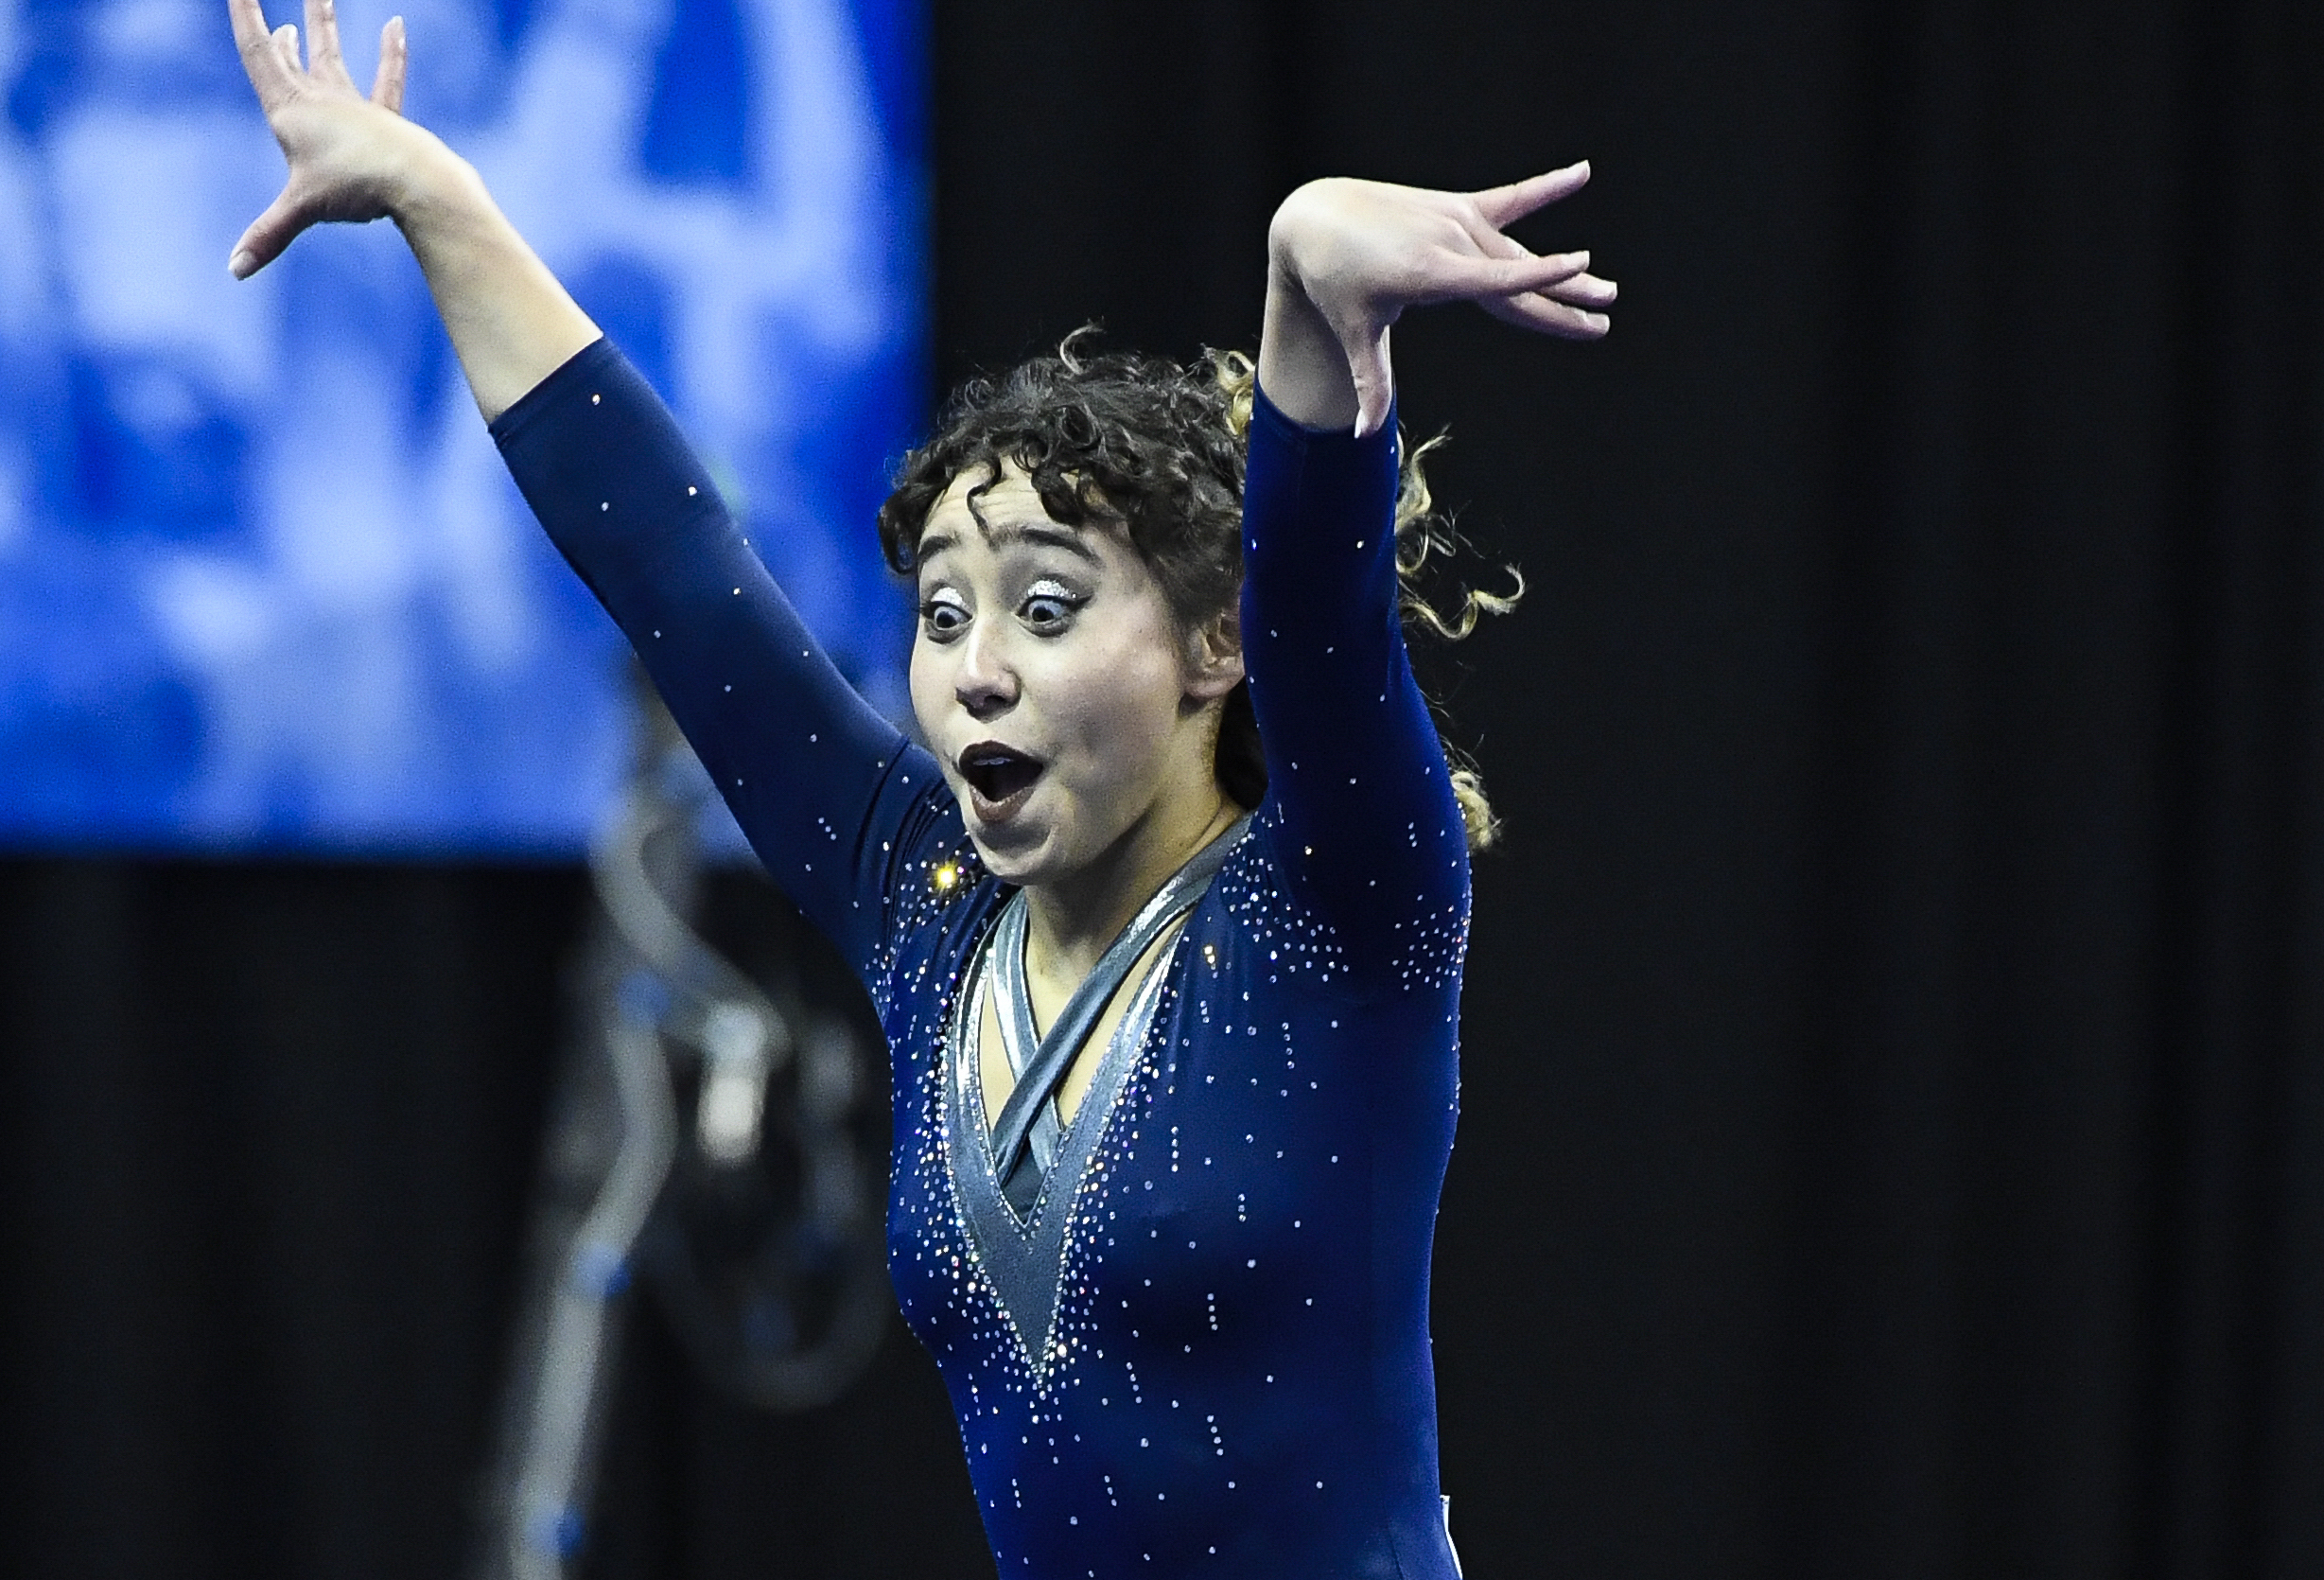 ST LOUIS, MO - APRIL 21: Katelyn Ohashi #563 of UCLA performs a floor routine during the Division I Women&#039;s Gymnastics Championship held at Chaifetz Arena on April 21, 2018 in St Louis, Missouri. UCLA won with a score of 197.5625 points. (Photo by Tim Nwachukwu/NCAA Photos via Getty Images)